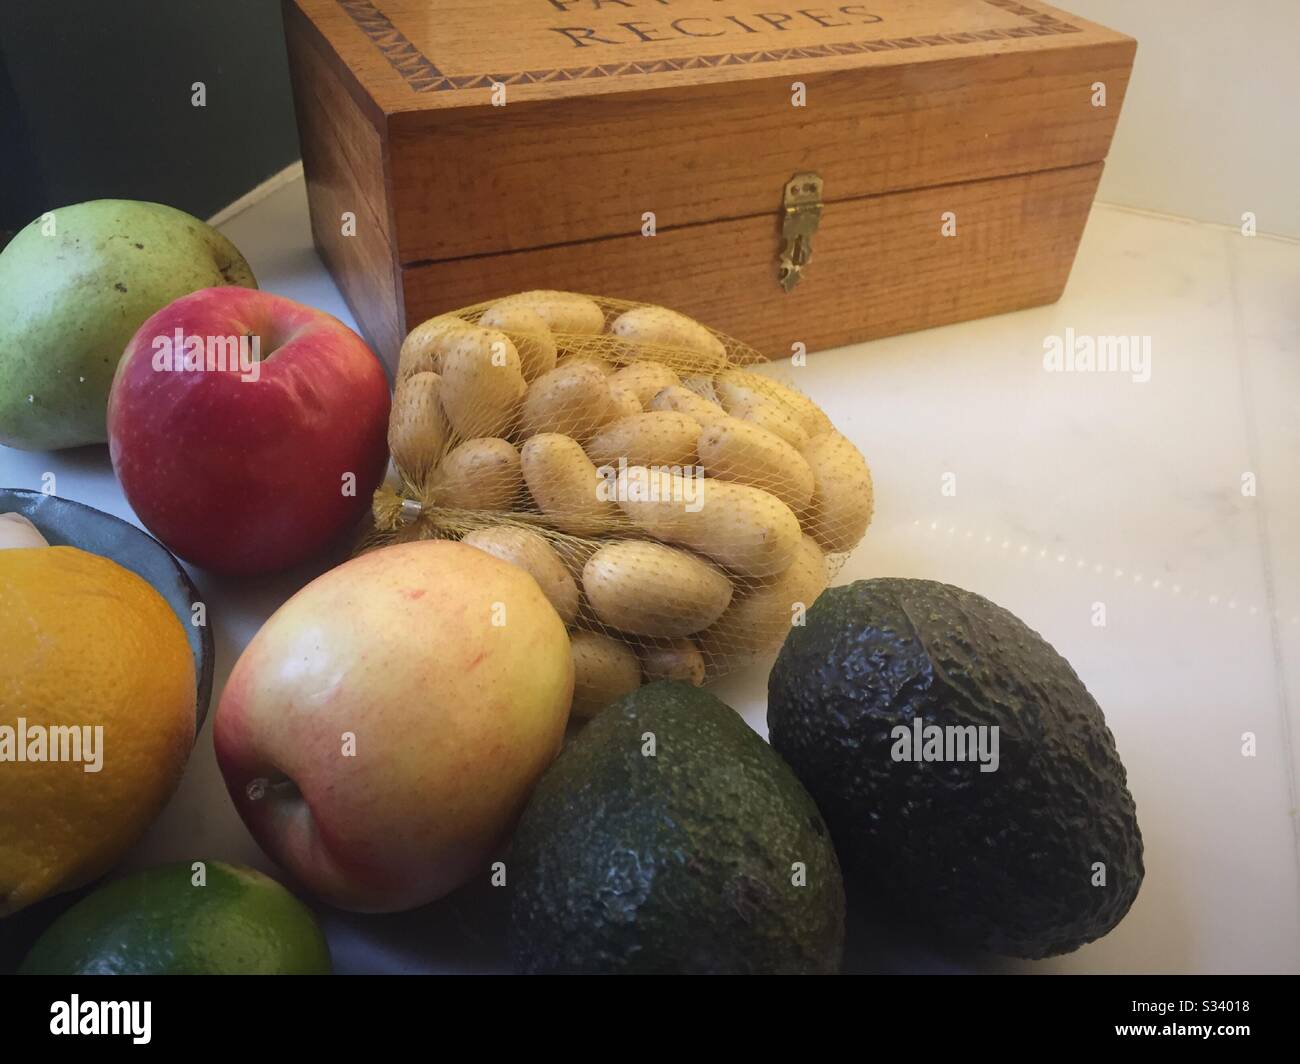 Still life of fruit and vegetables with a recipe box on a residential kitchen counter, USA Stock Photo